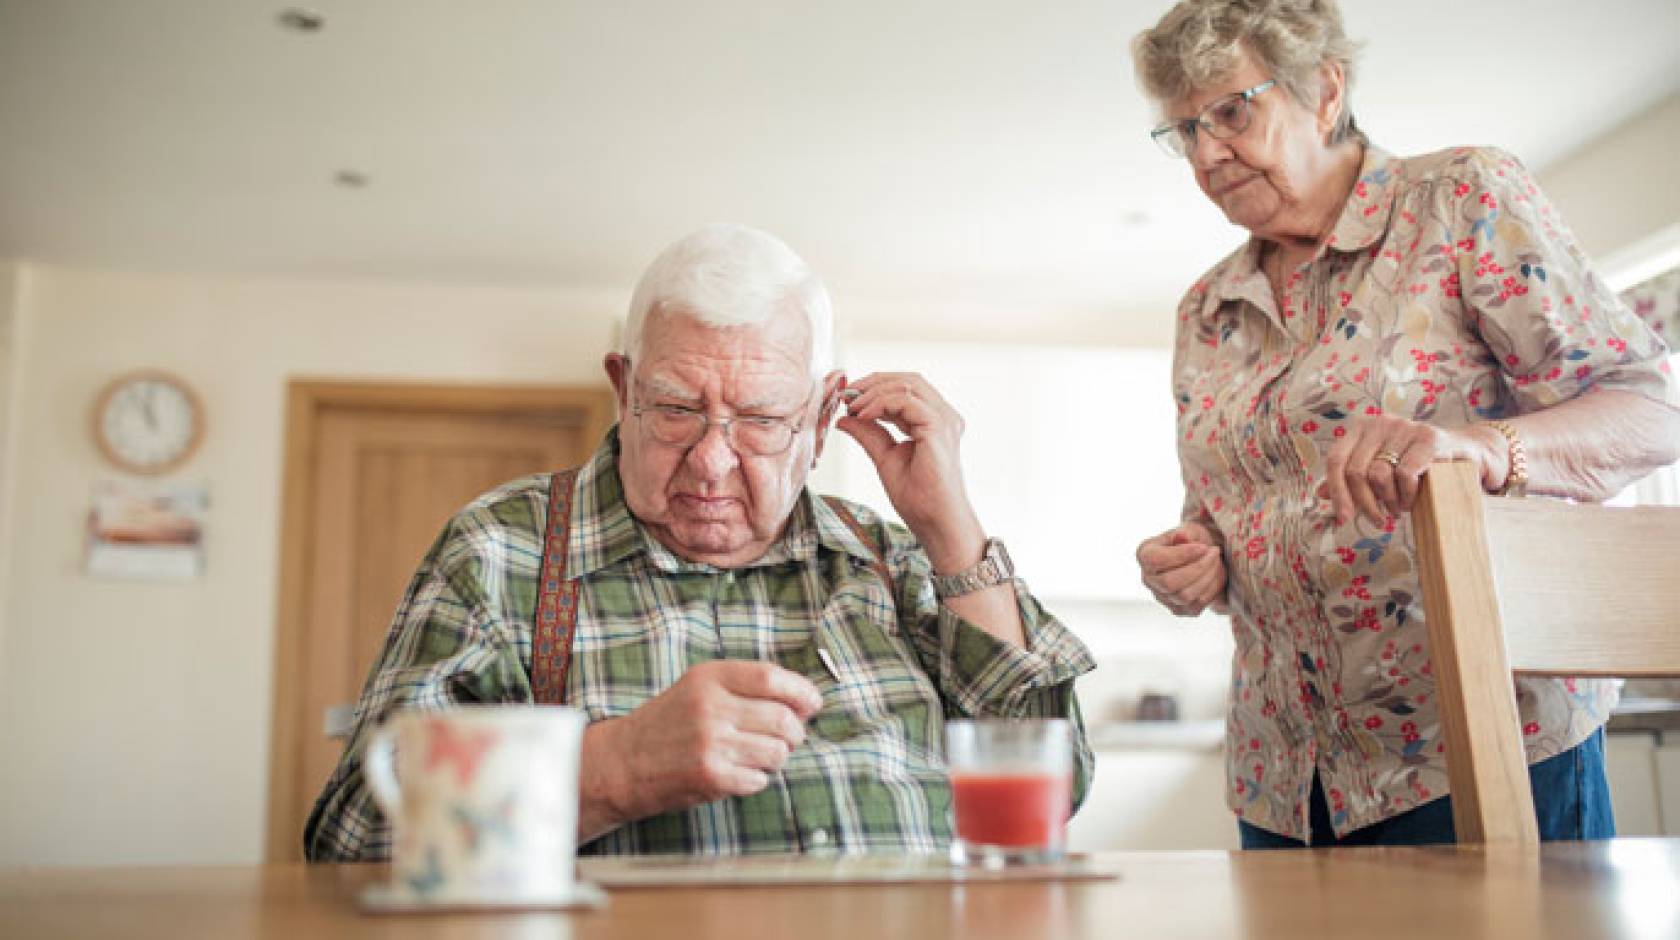 Hearing aid adjusted by senior man with senior woman nearby